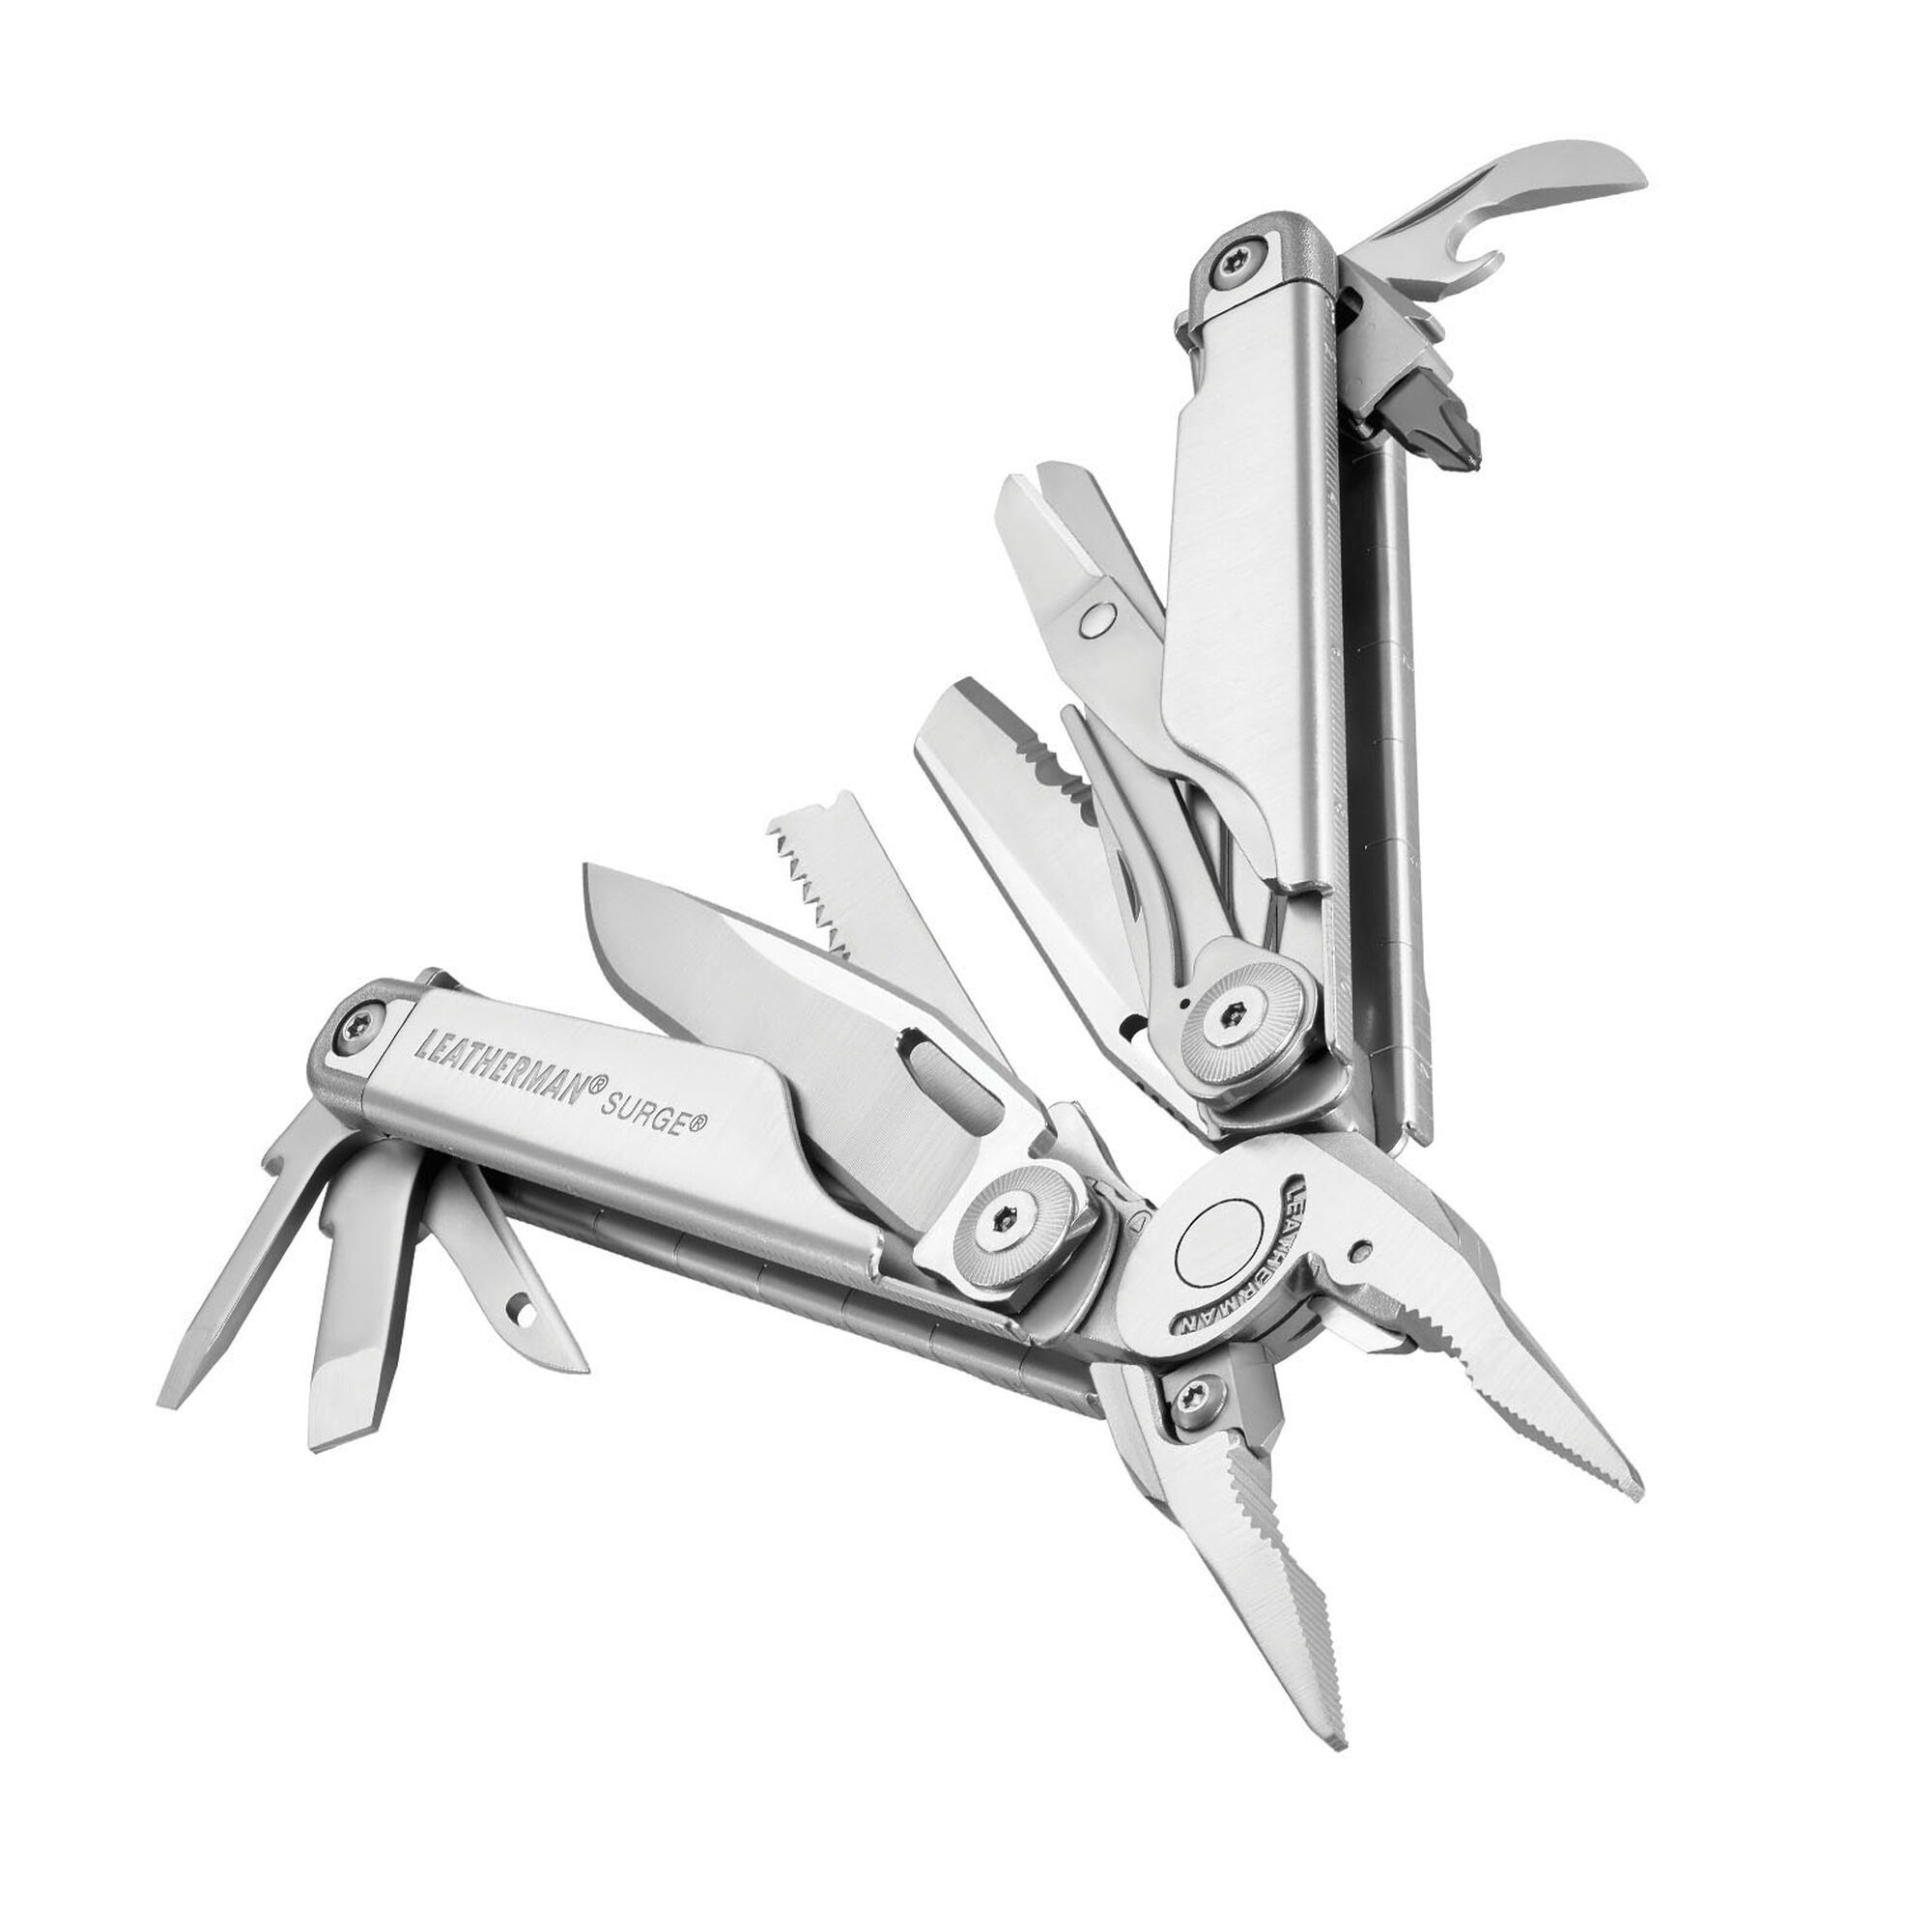 Replacement accessories Leatherman Surge Saw, Leatherman Surge File; Surge  parts